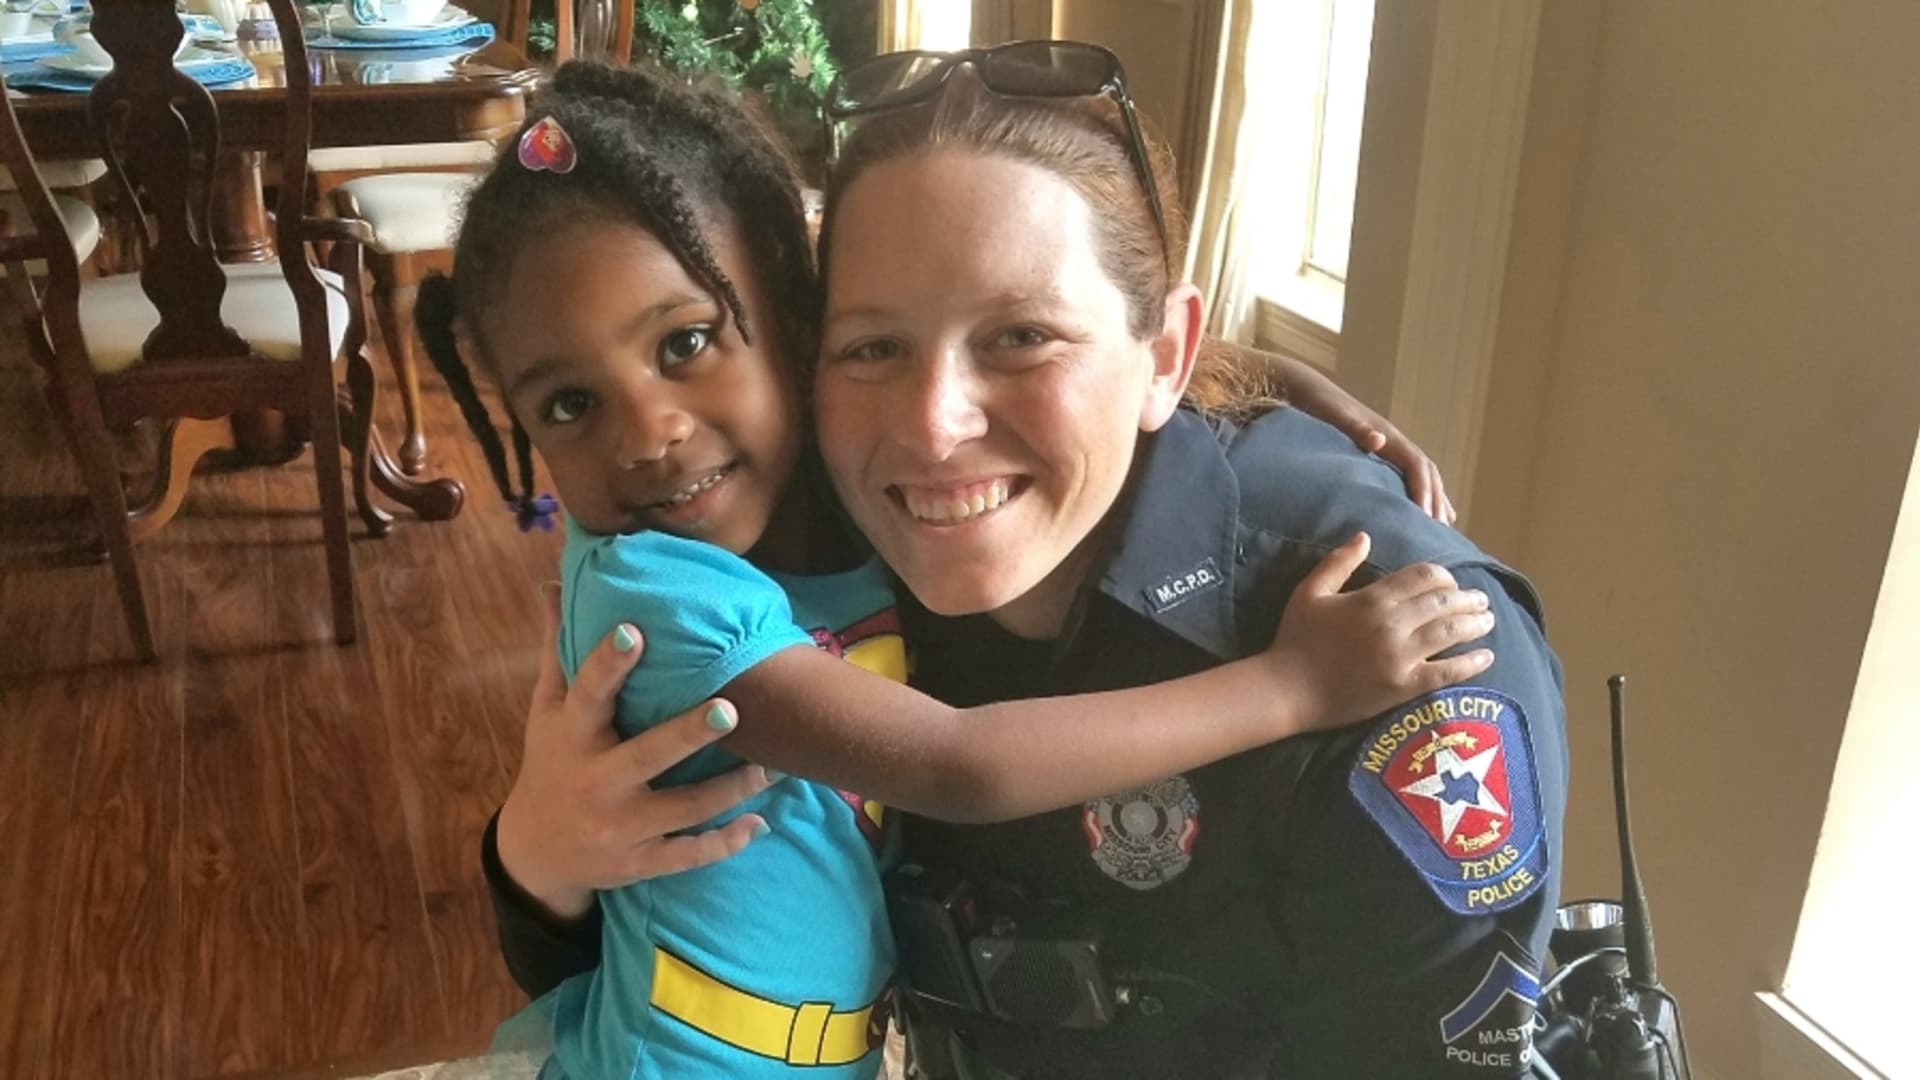 After Khloe Joiner met with Officer Jessica Berry, she A Book and A Smile was born.